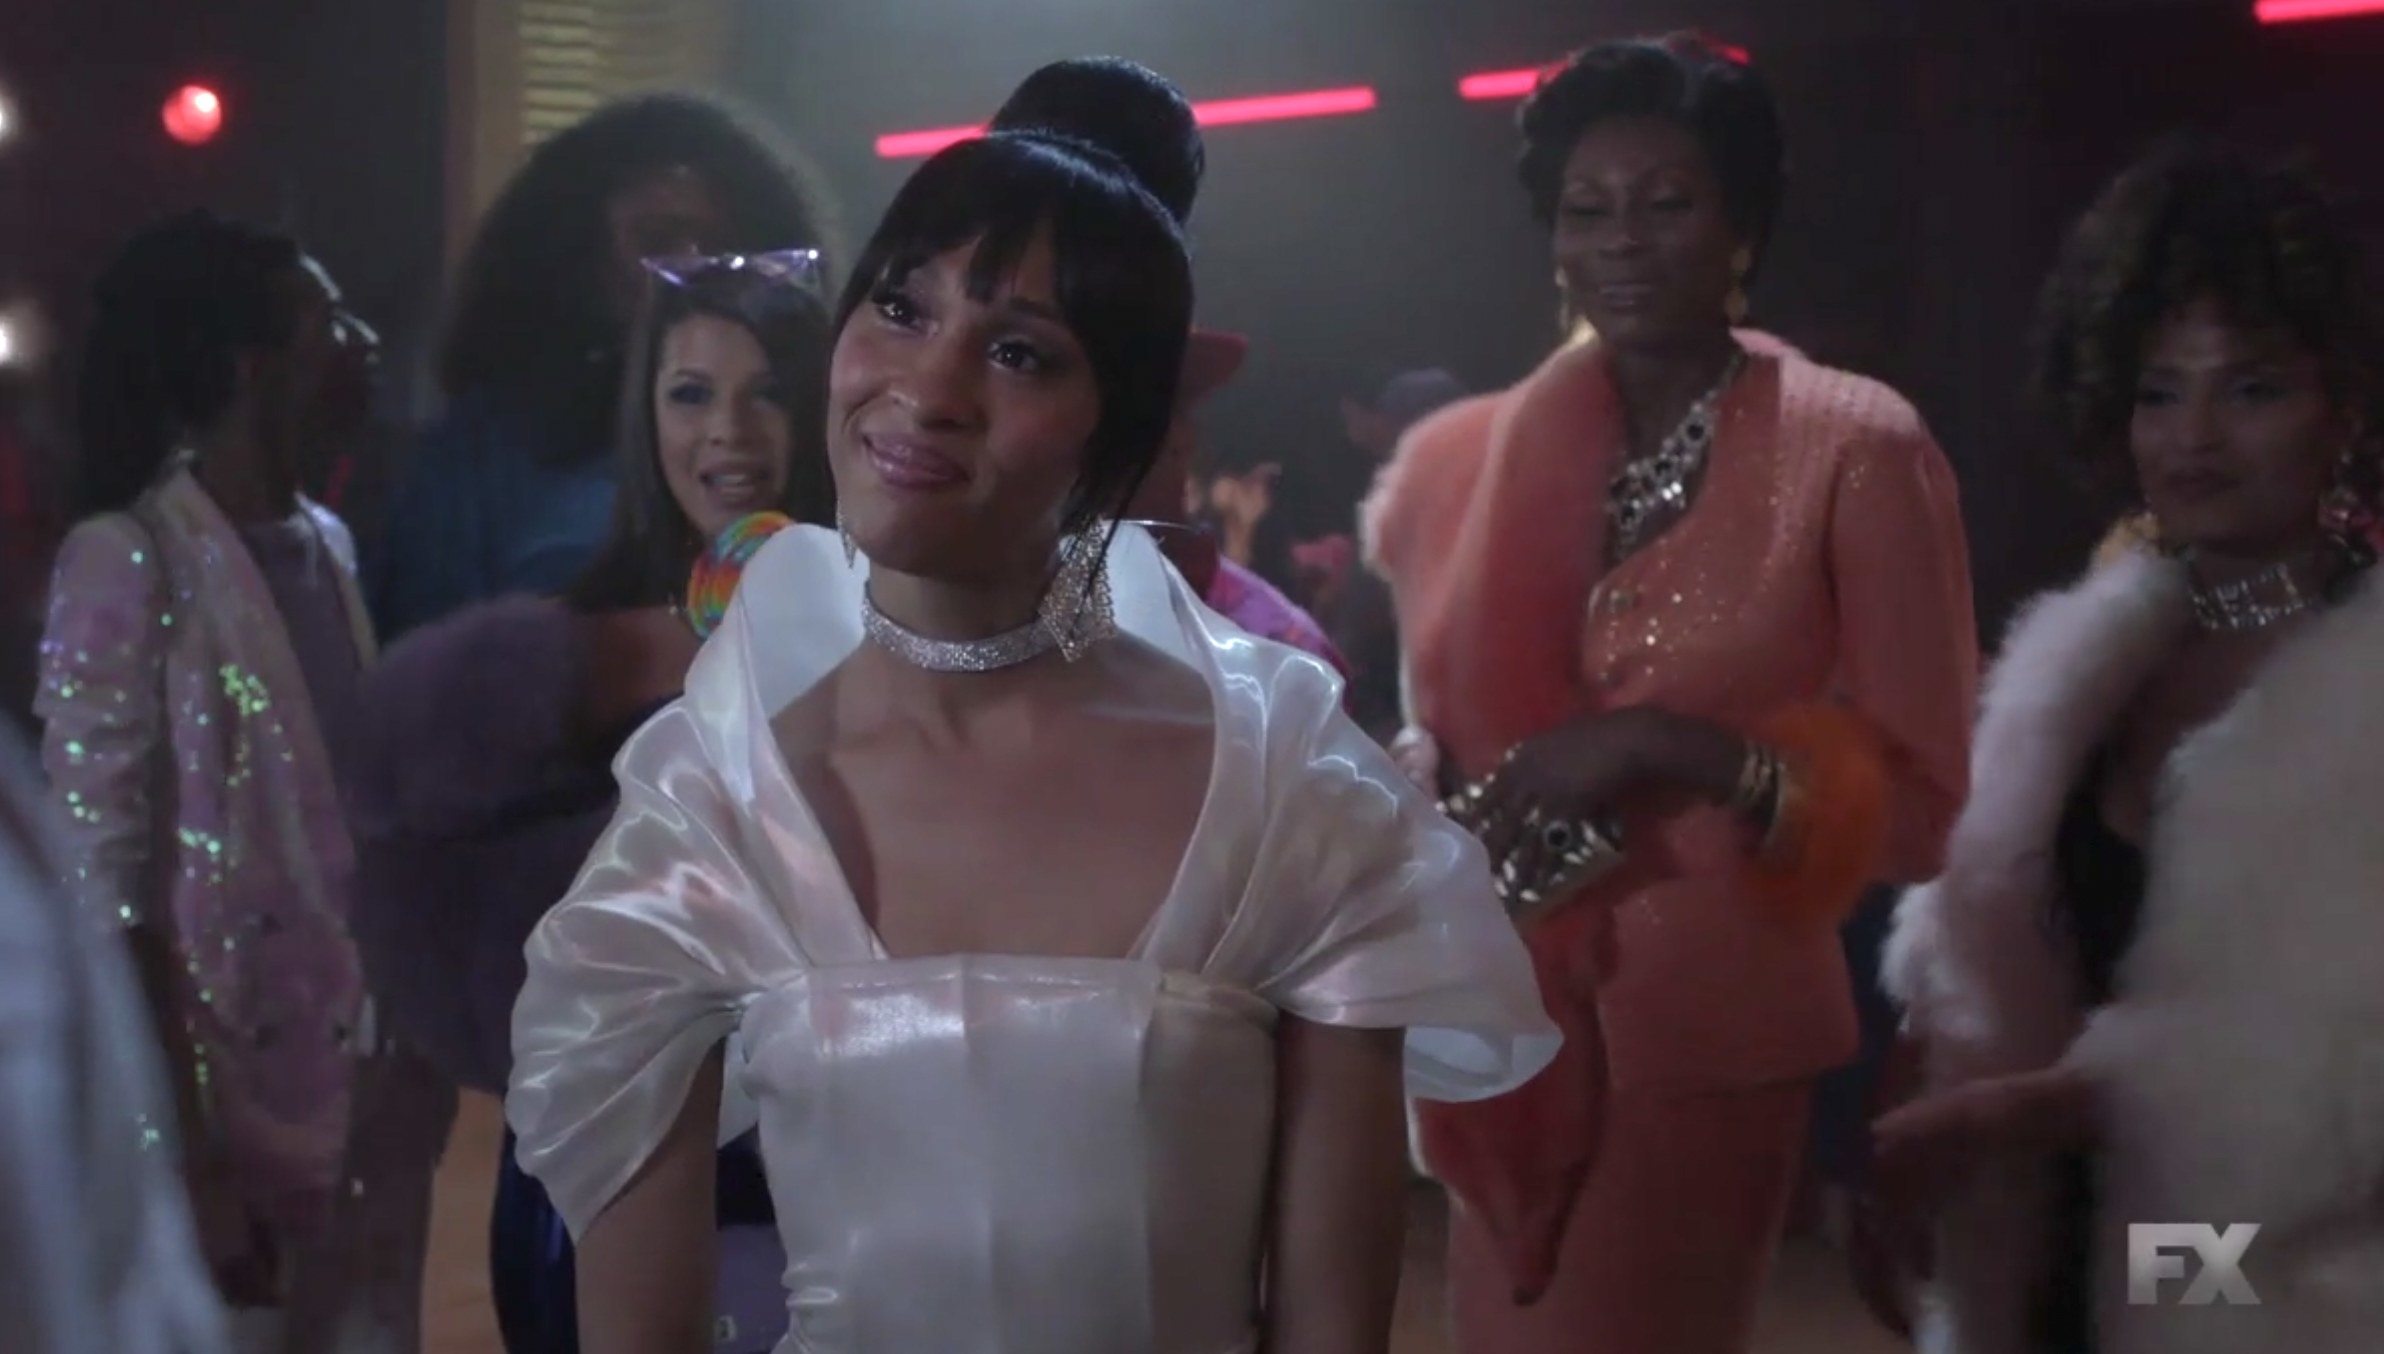 Best Reactions to the 'Pose' Finale - 'Pose' Series Finale Recap